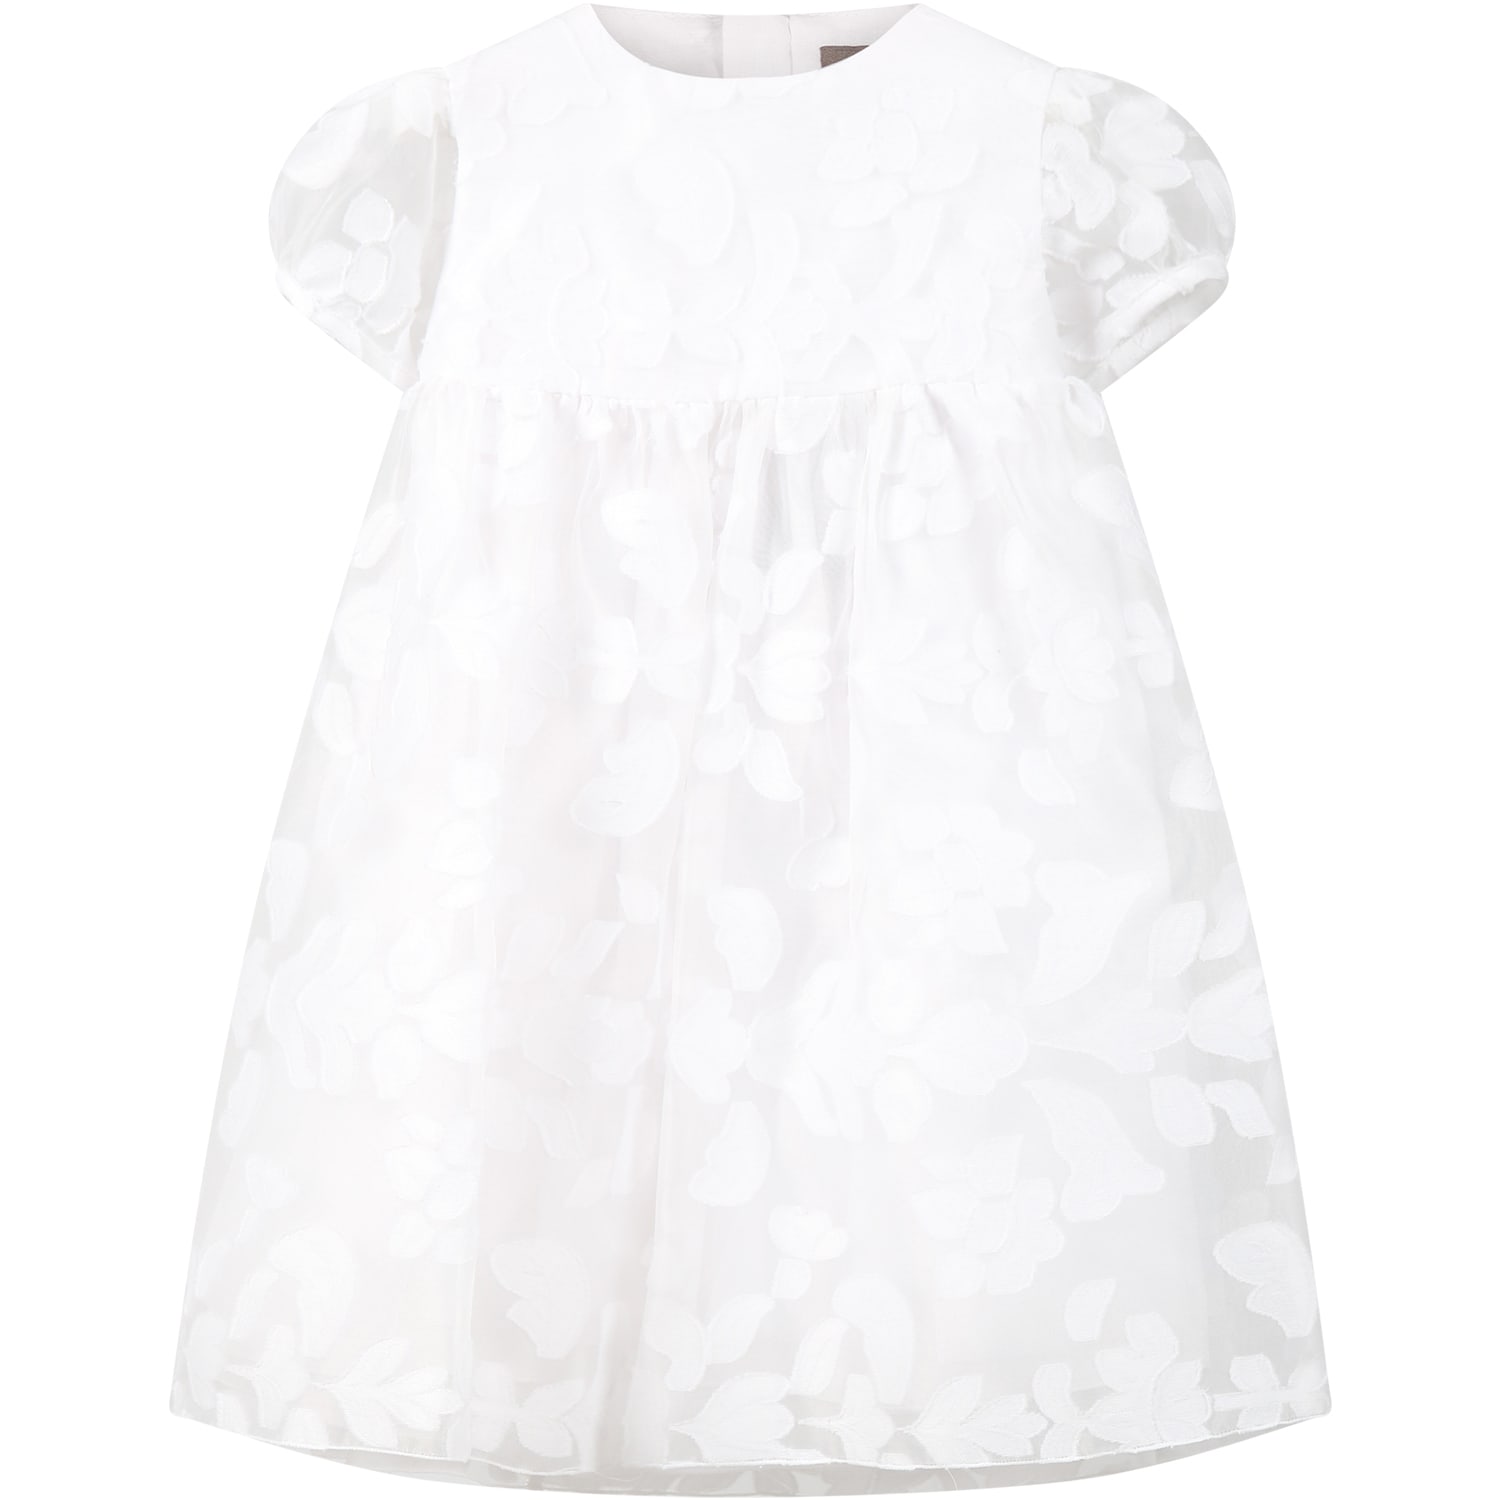 Little Bear White Dress For Baby Girl With Floral Details